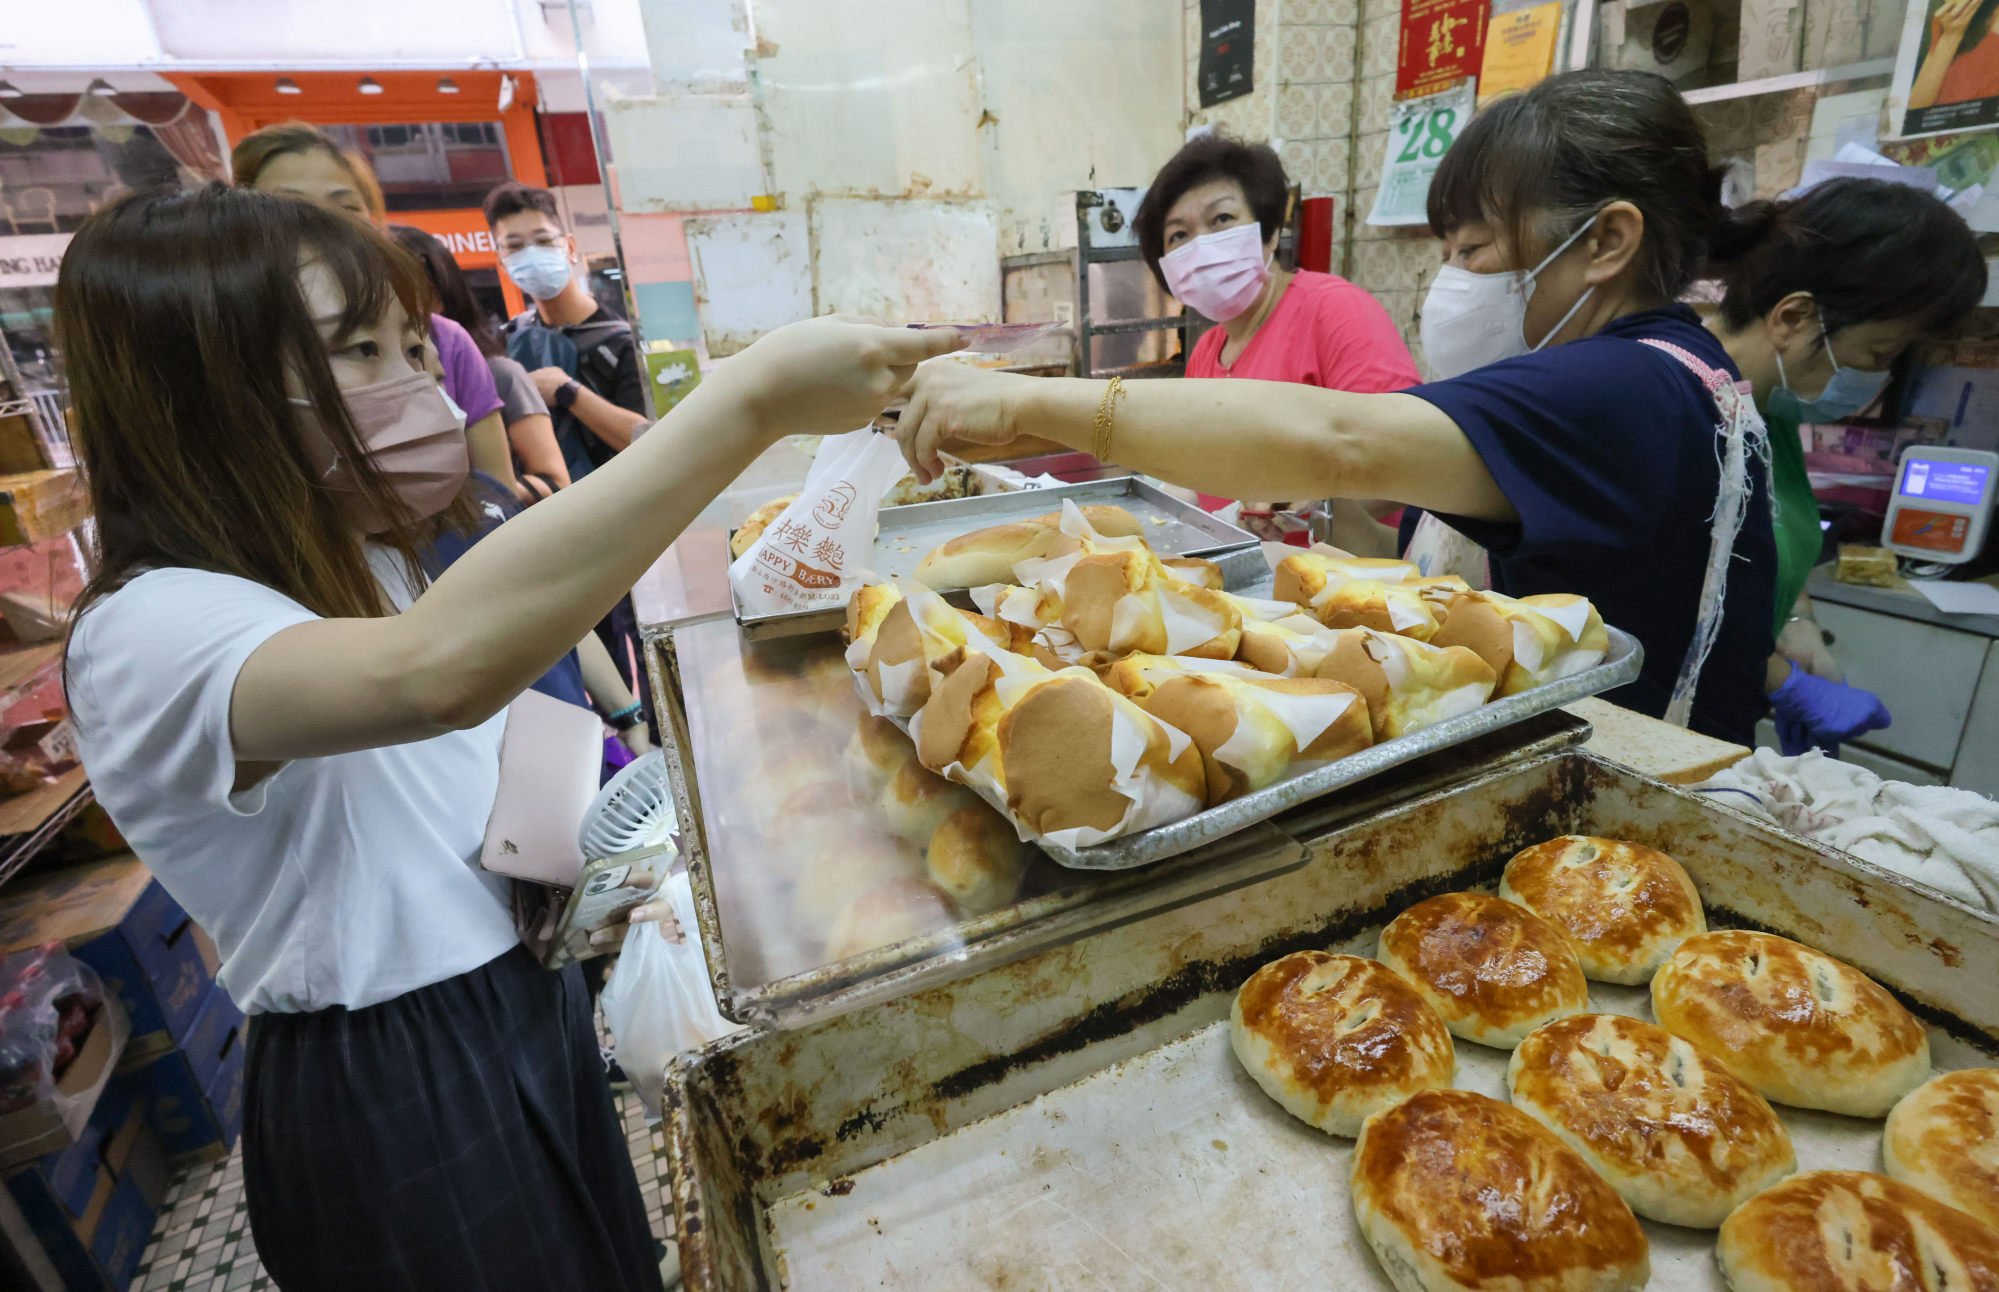 Many of the shop’s pastries have been snapped up in the morning. Photo: Dickson Lee